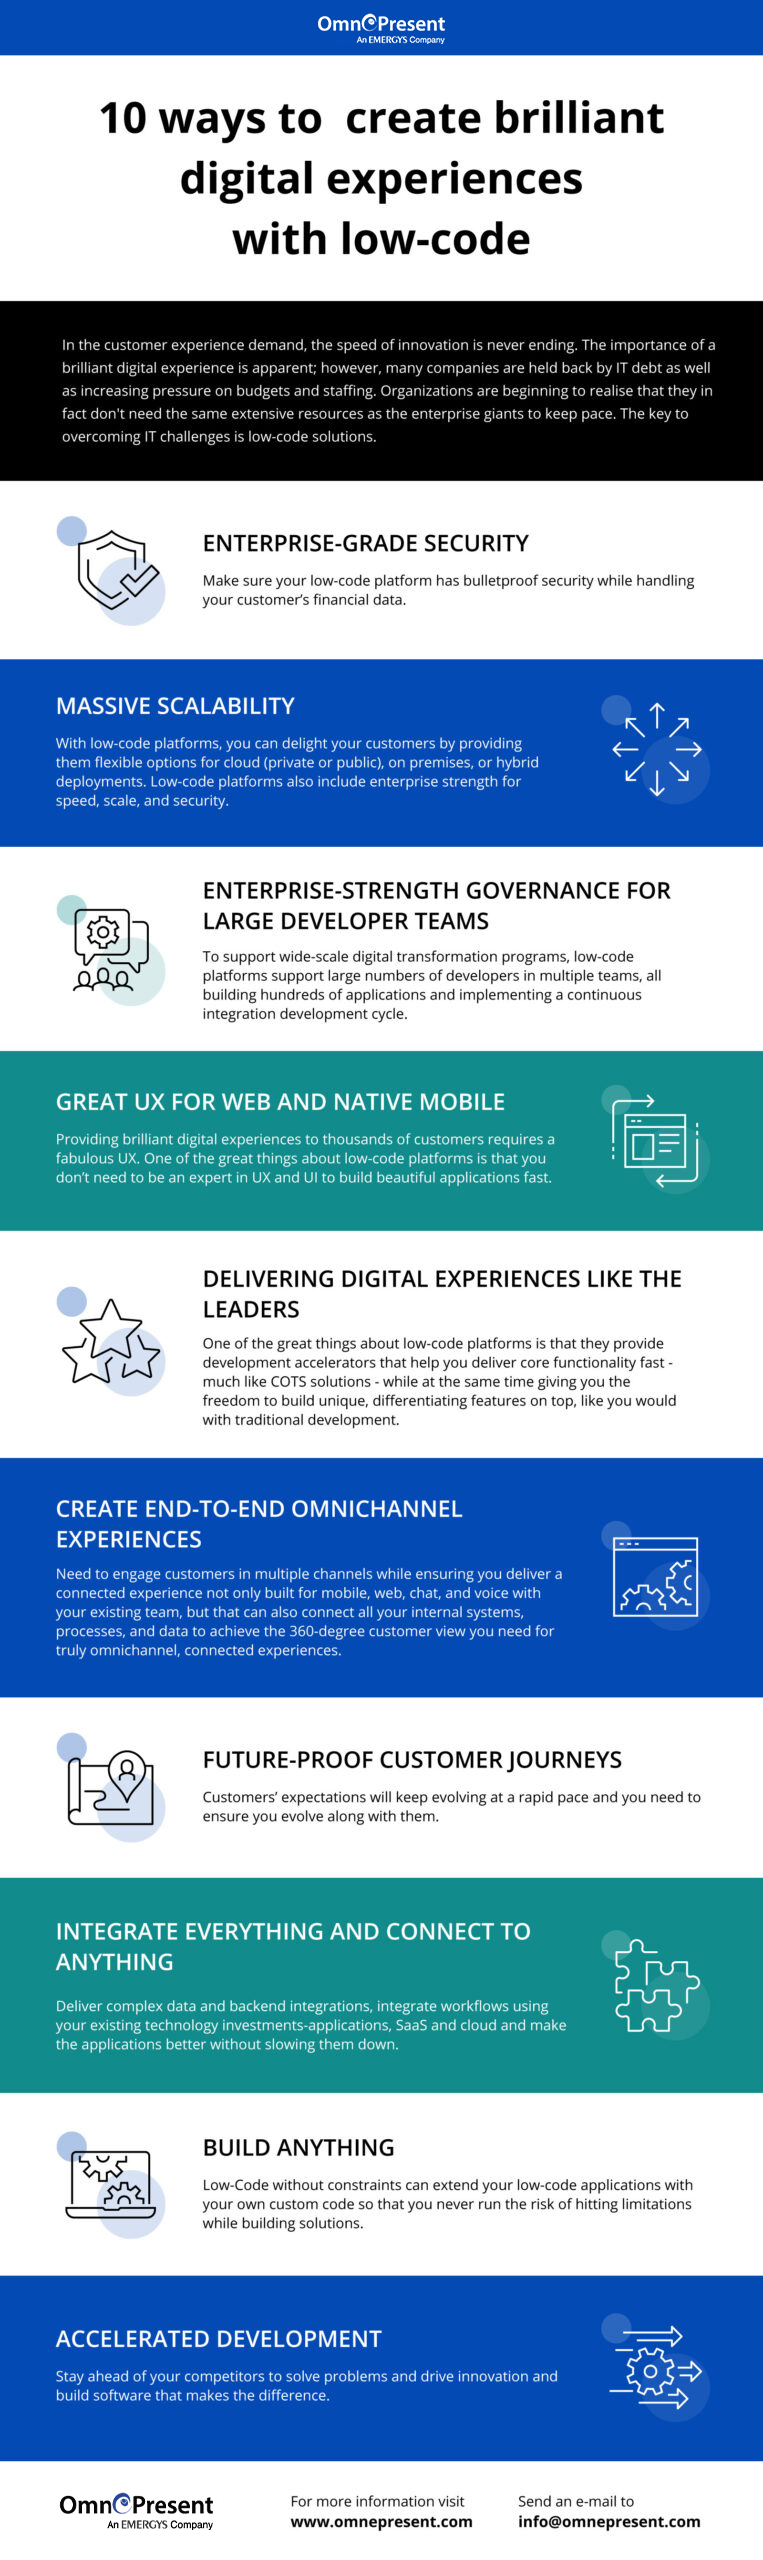 10-ways-to-create-brilliant-digital-experiences-with-low-code